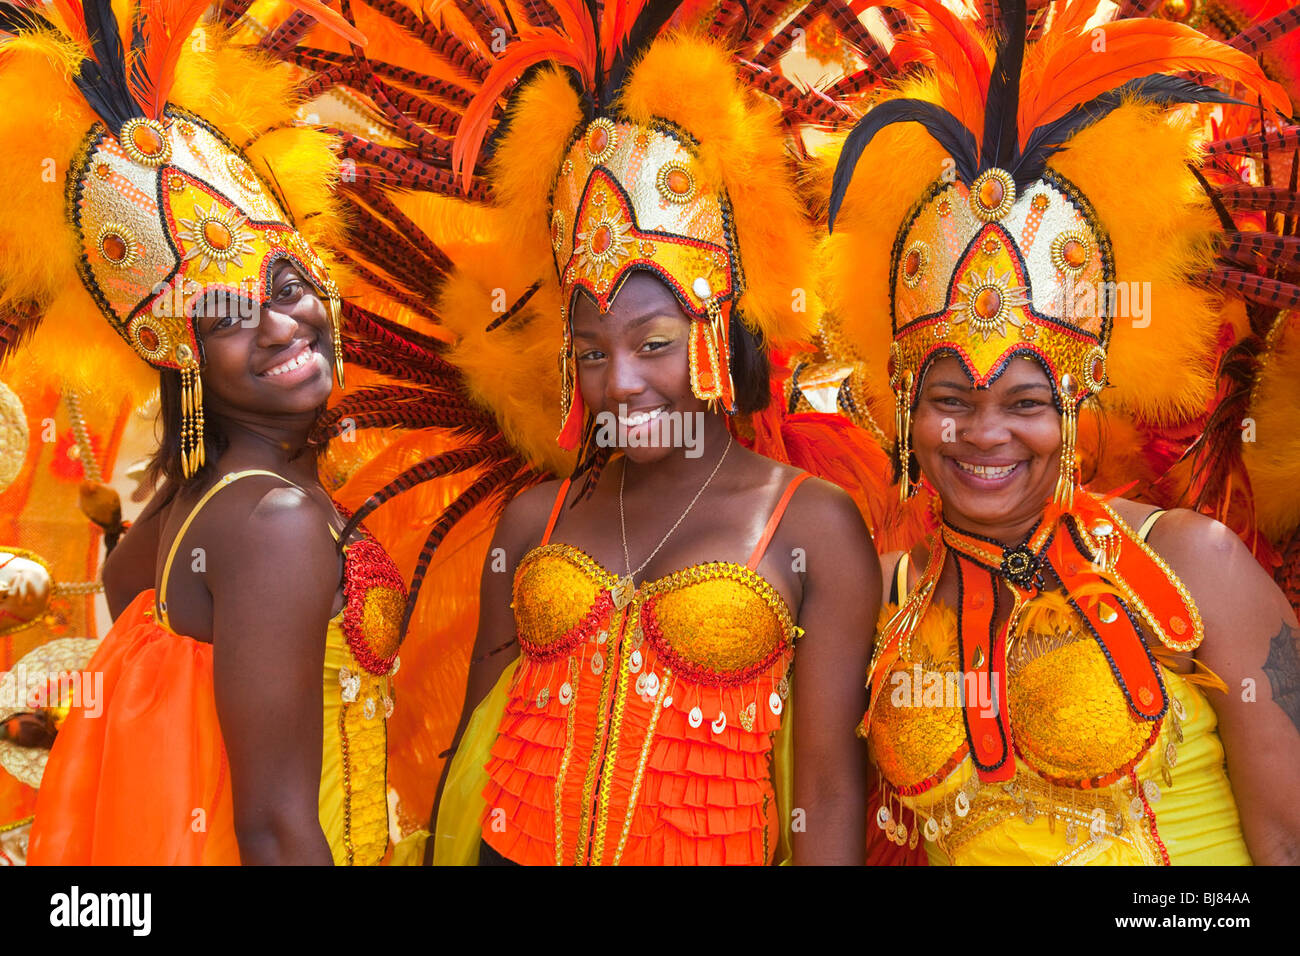 West Indian American Day Parade marchers Stock Photo